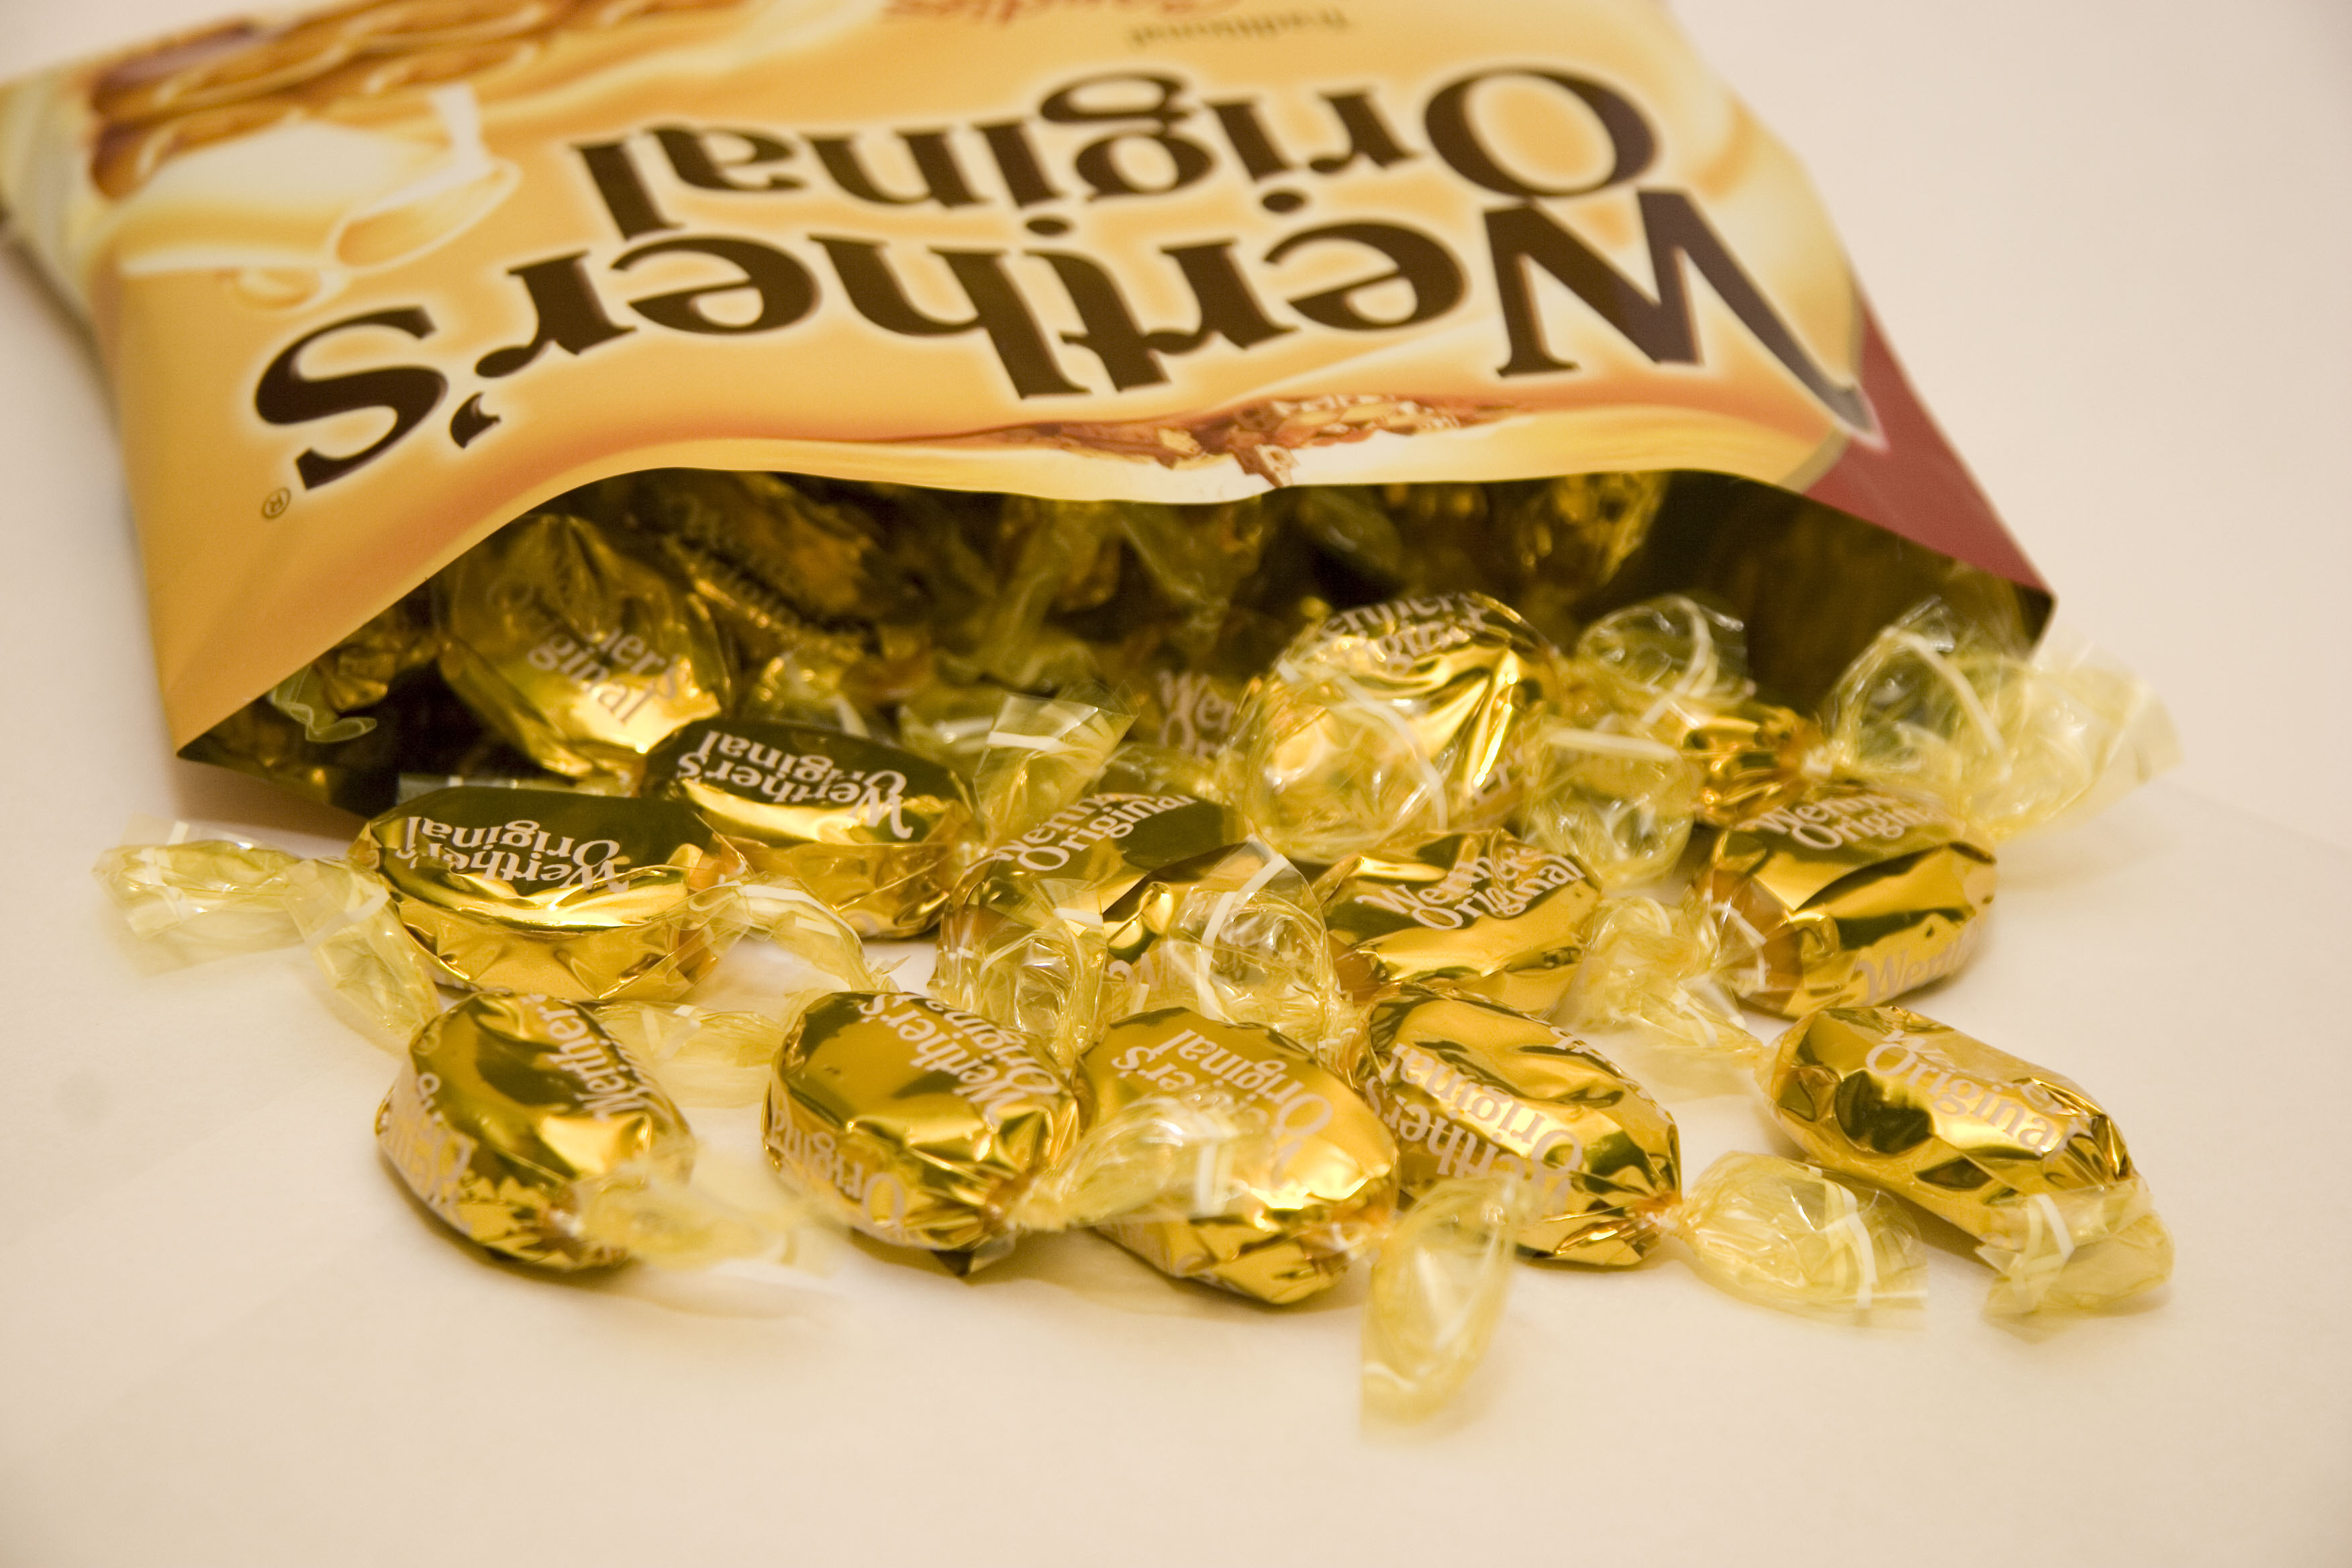 File:An Open Bag of Werther's Original.jpg - Wikimedia Commons